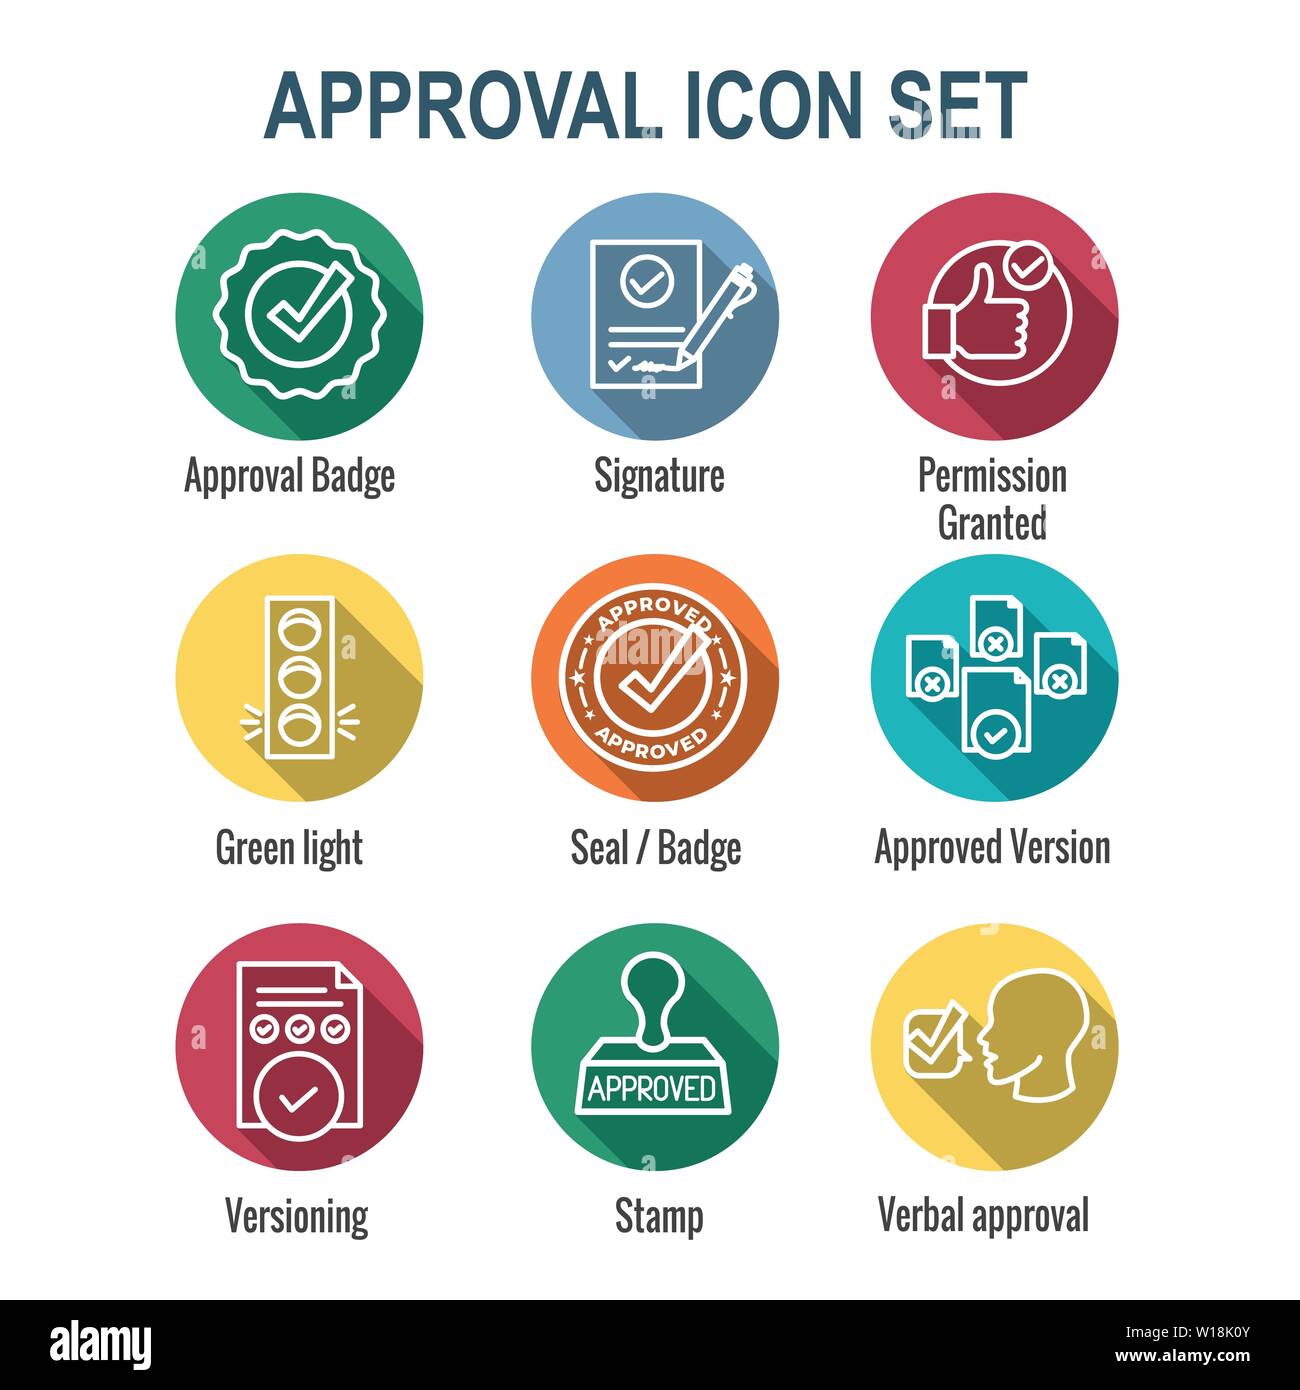 Approval and Signature Icon Set w Stamp and version icons Stock Vector